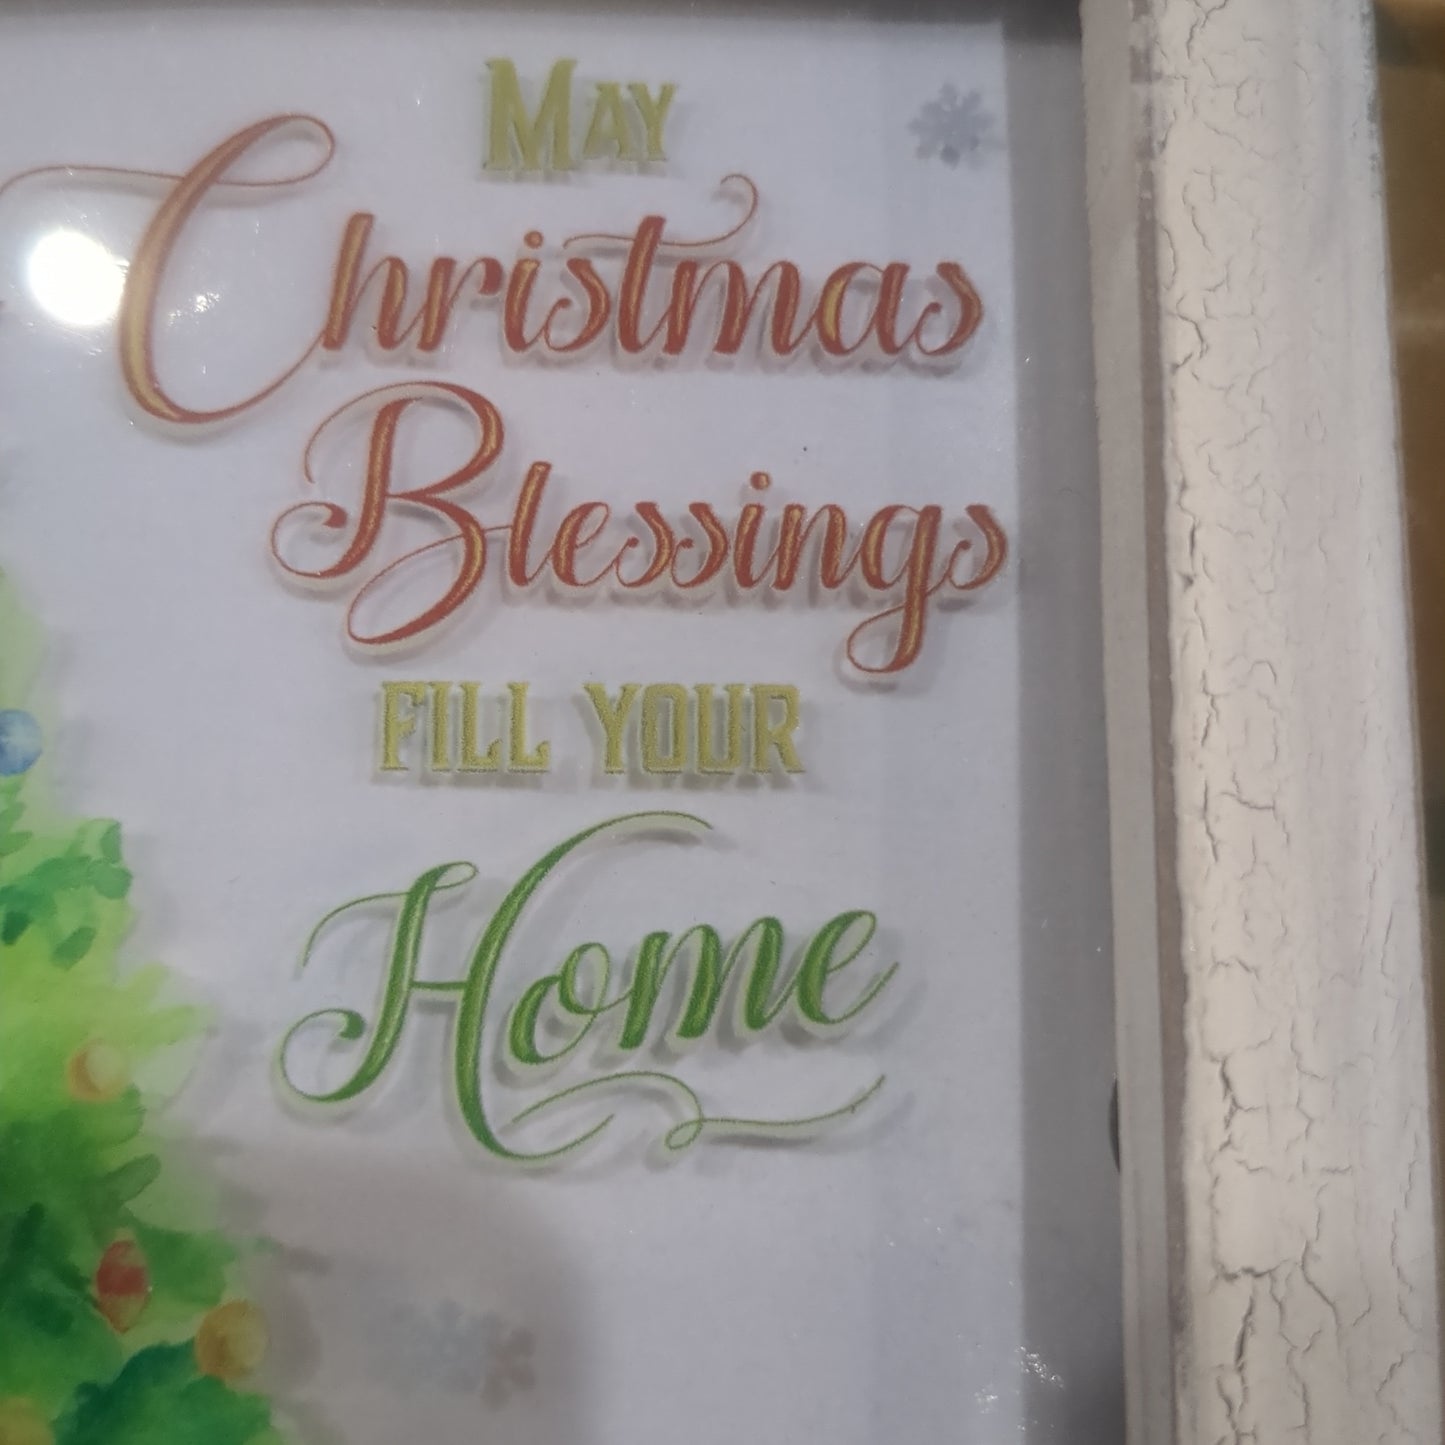 5x7 Christmas blessings fill your homewindow